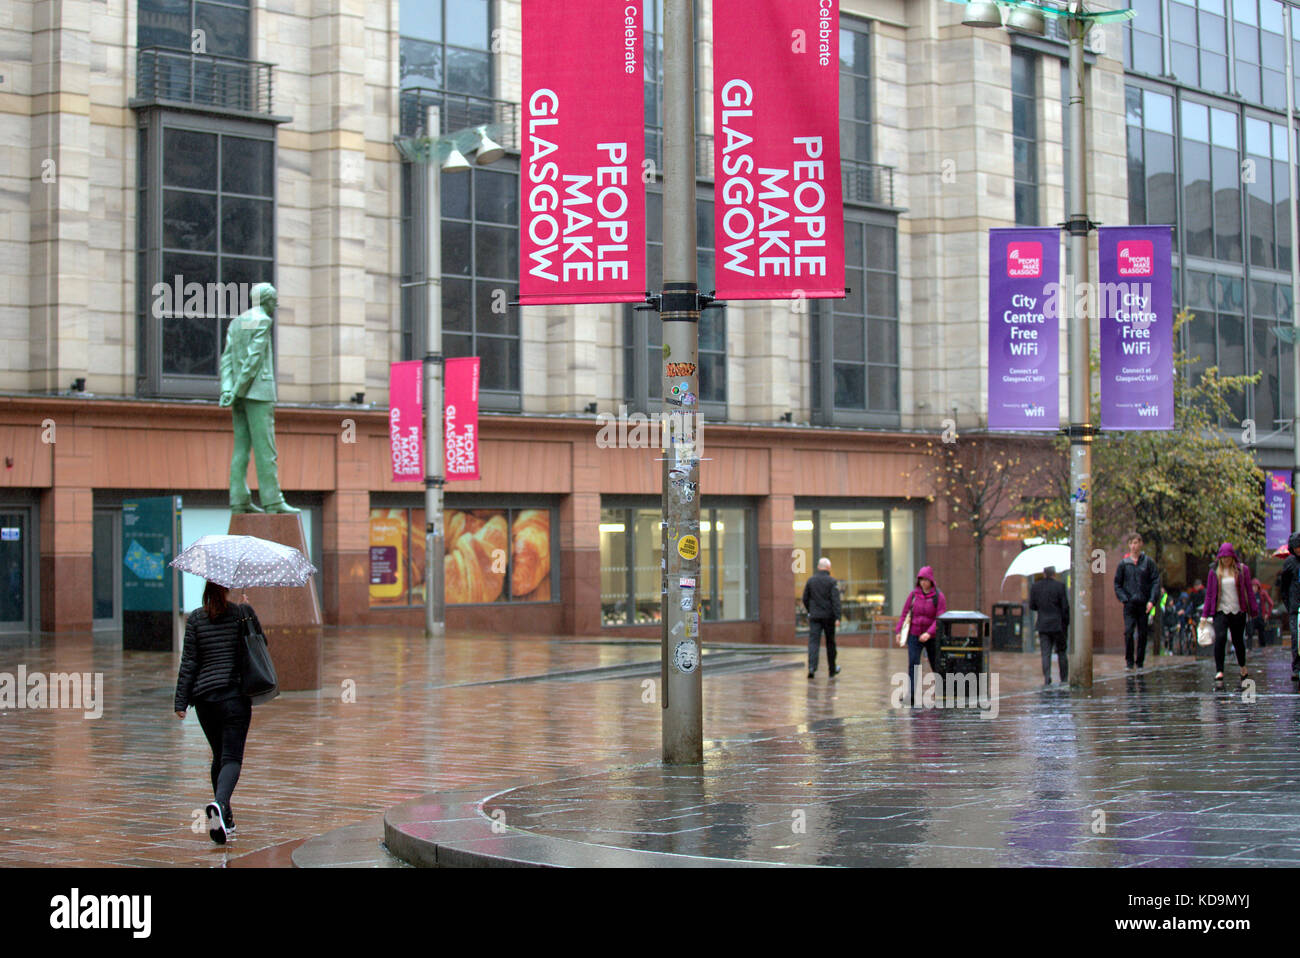 UK Weather The awful summer weather continues into autumn as Heavy showers and strong winds batter the city near the Donald Dewar statue on Buchanan Stock Photo